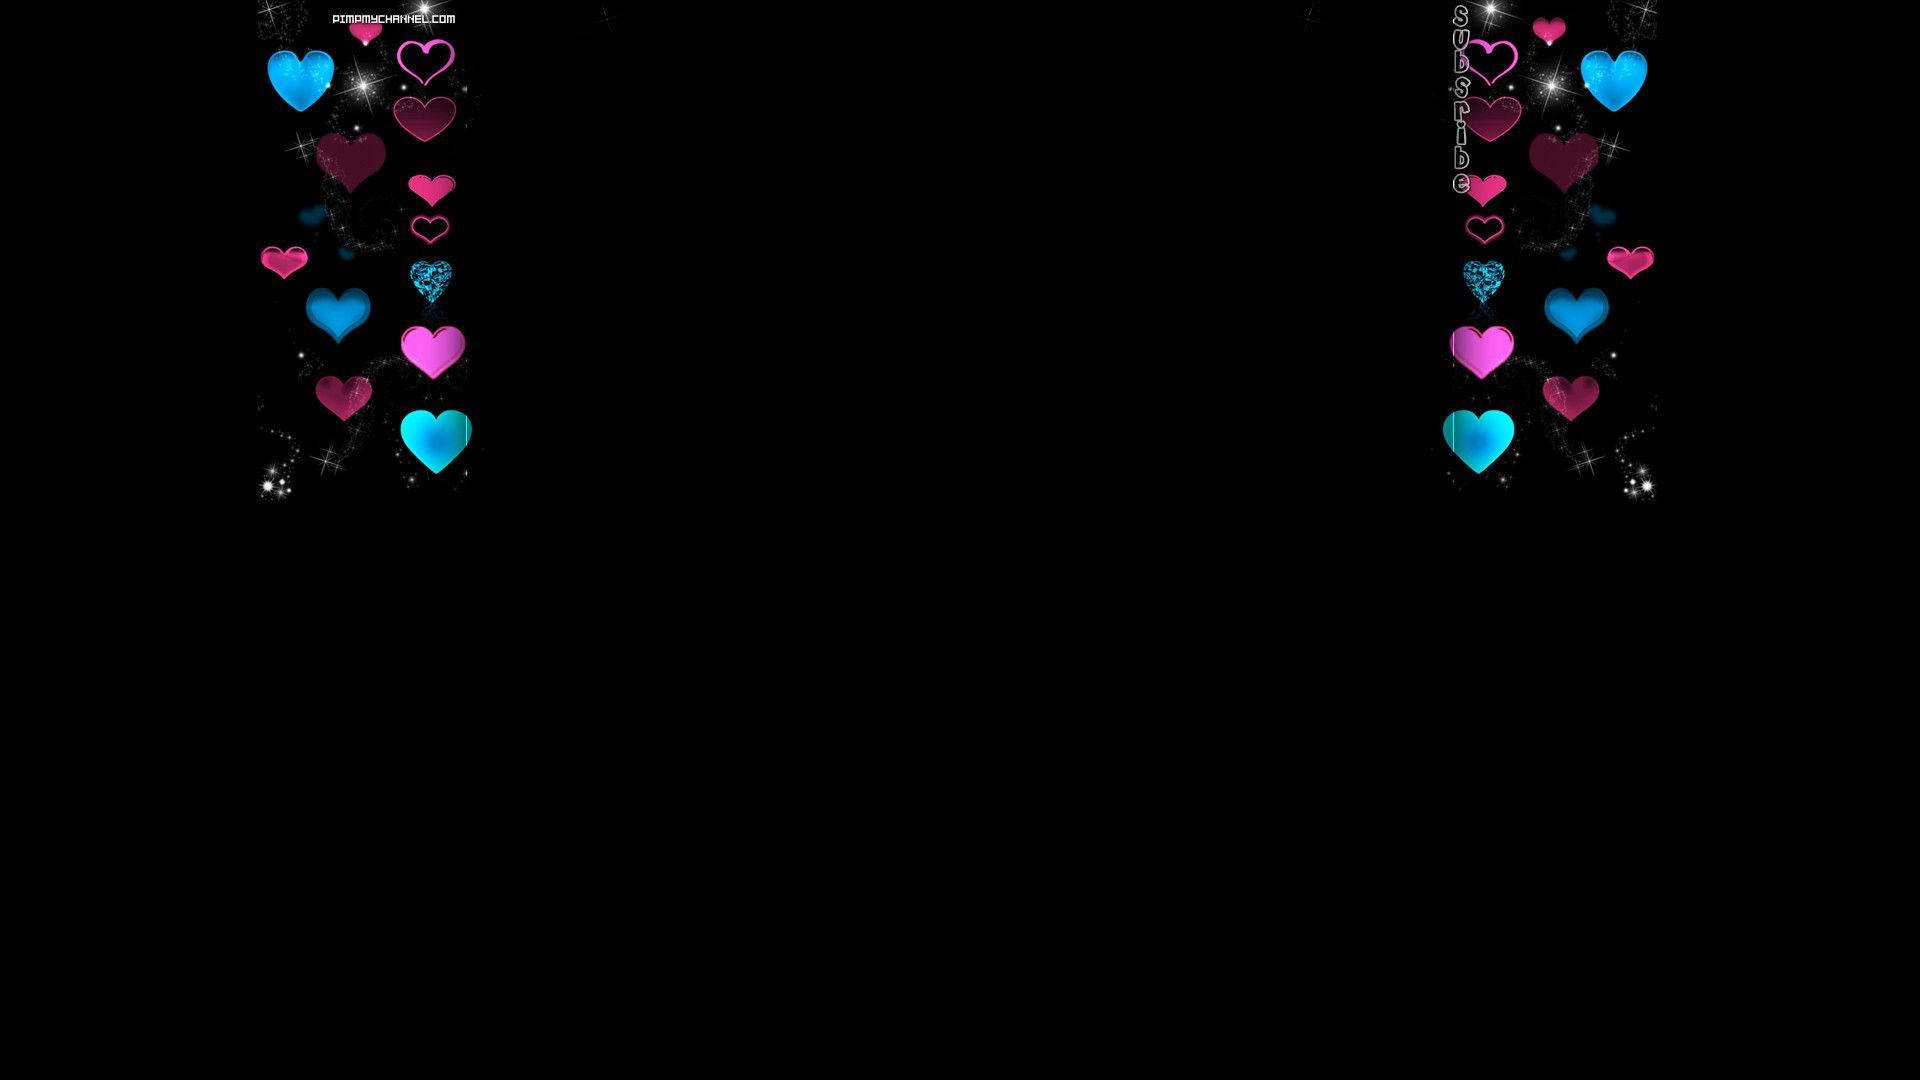 Dangling Hearts For Dark Girly Background Wallpaper